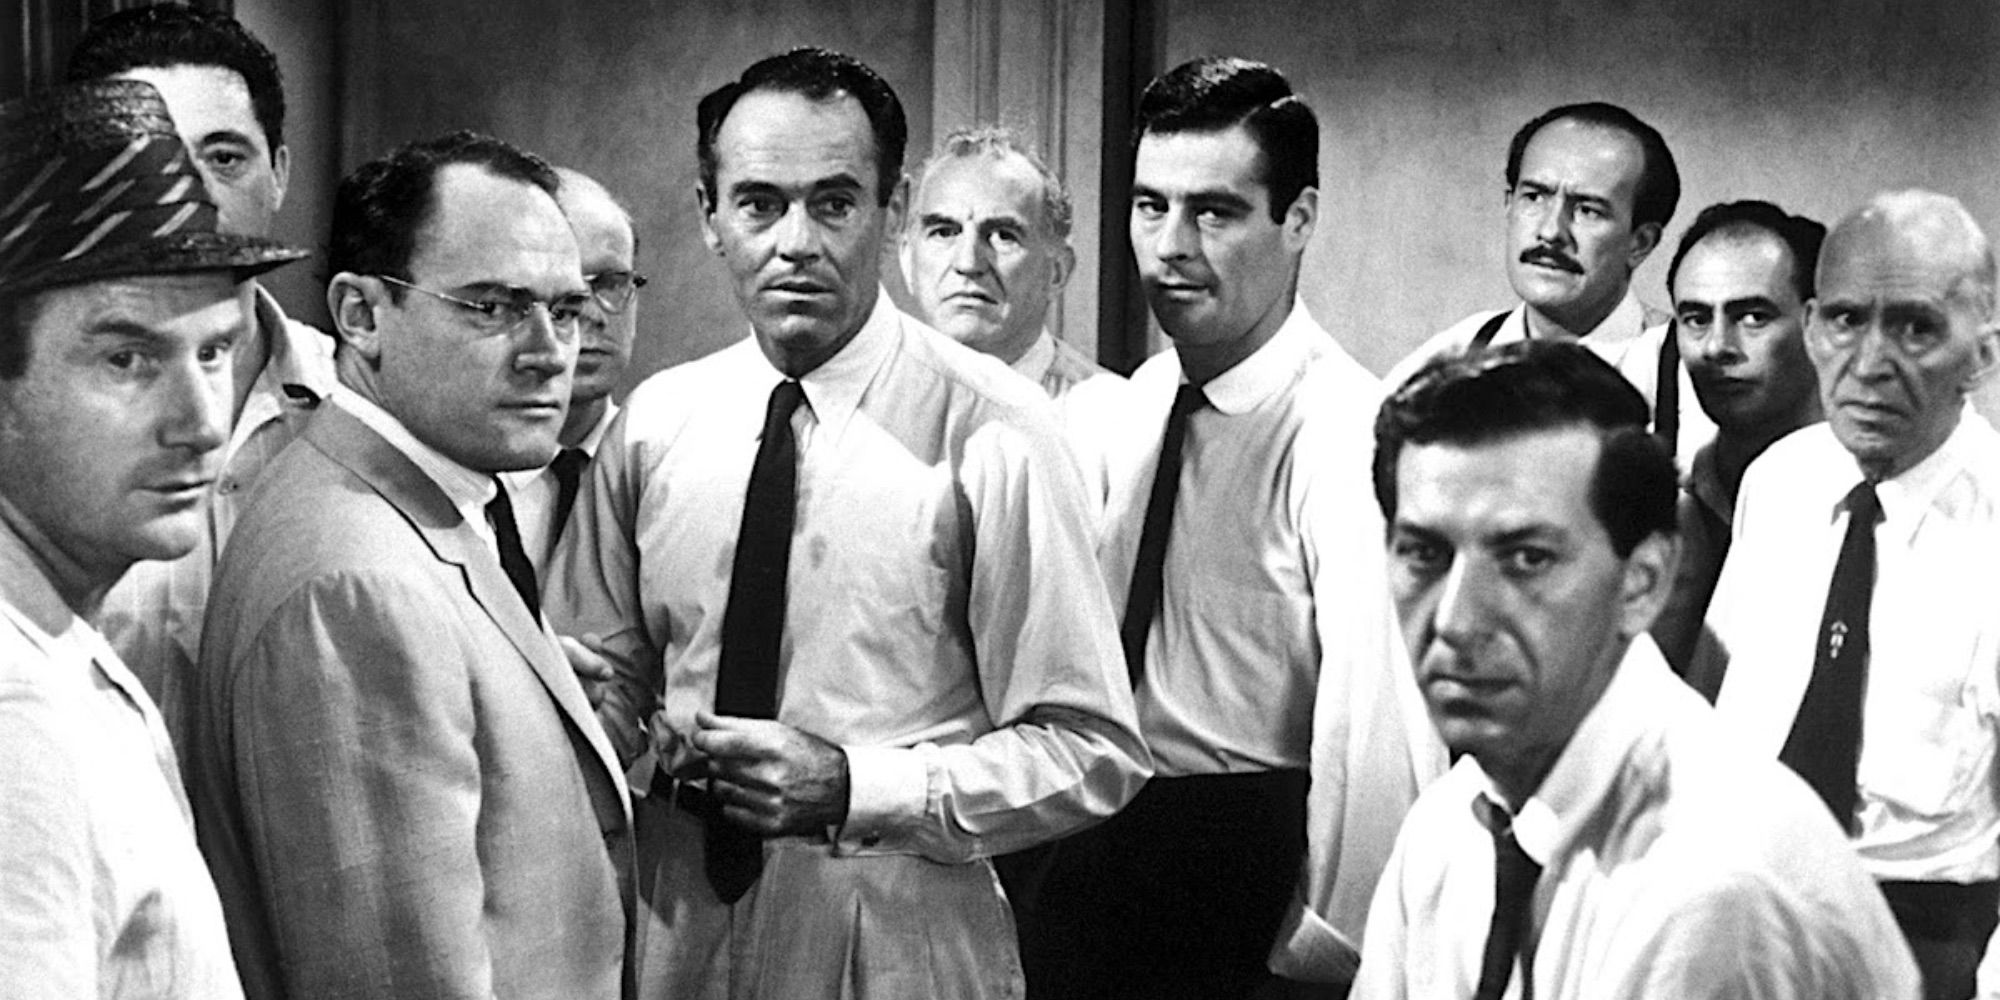 12 angry men characters